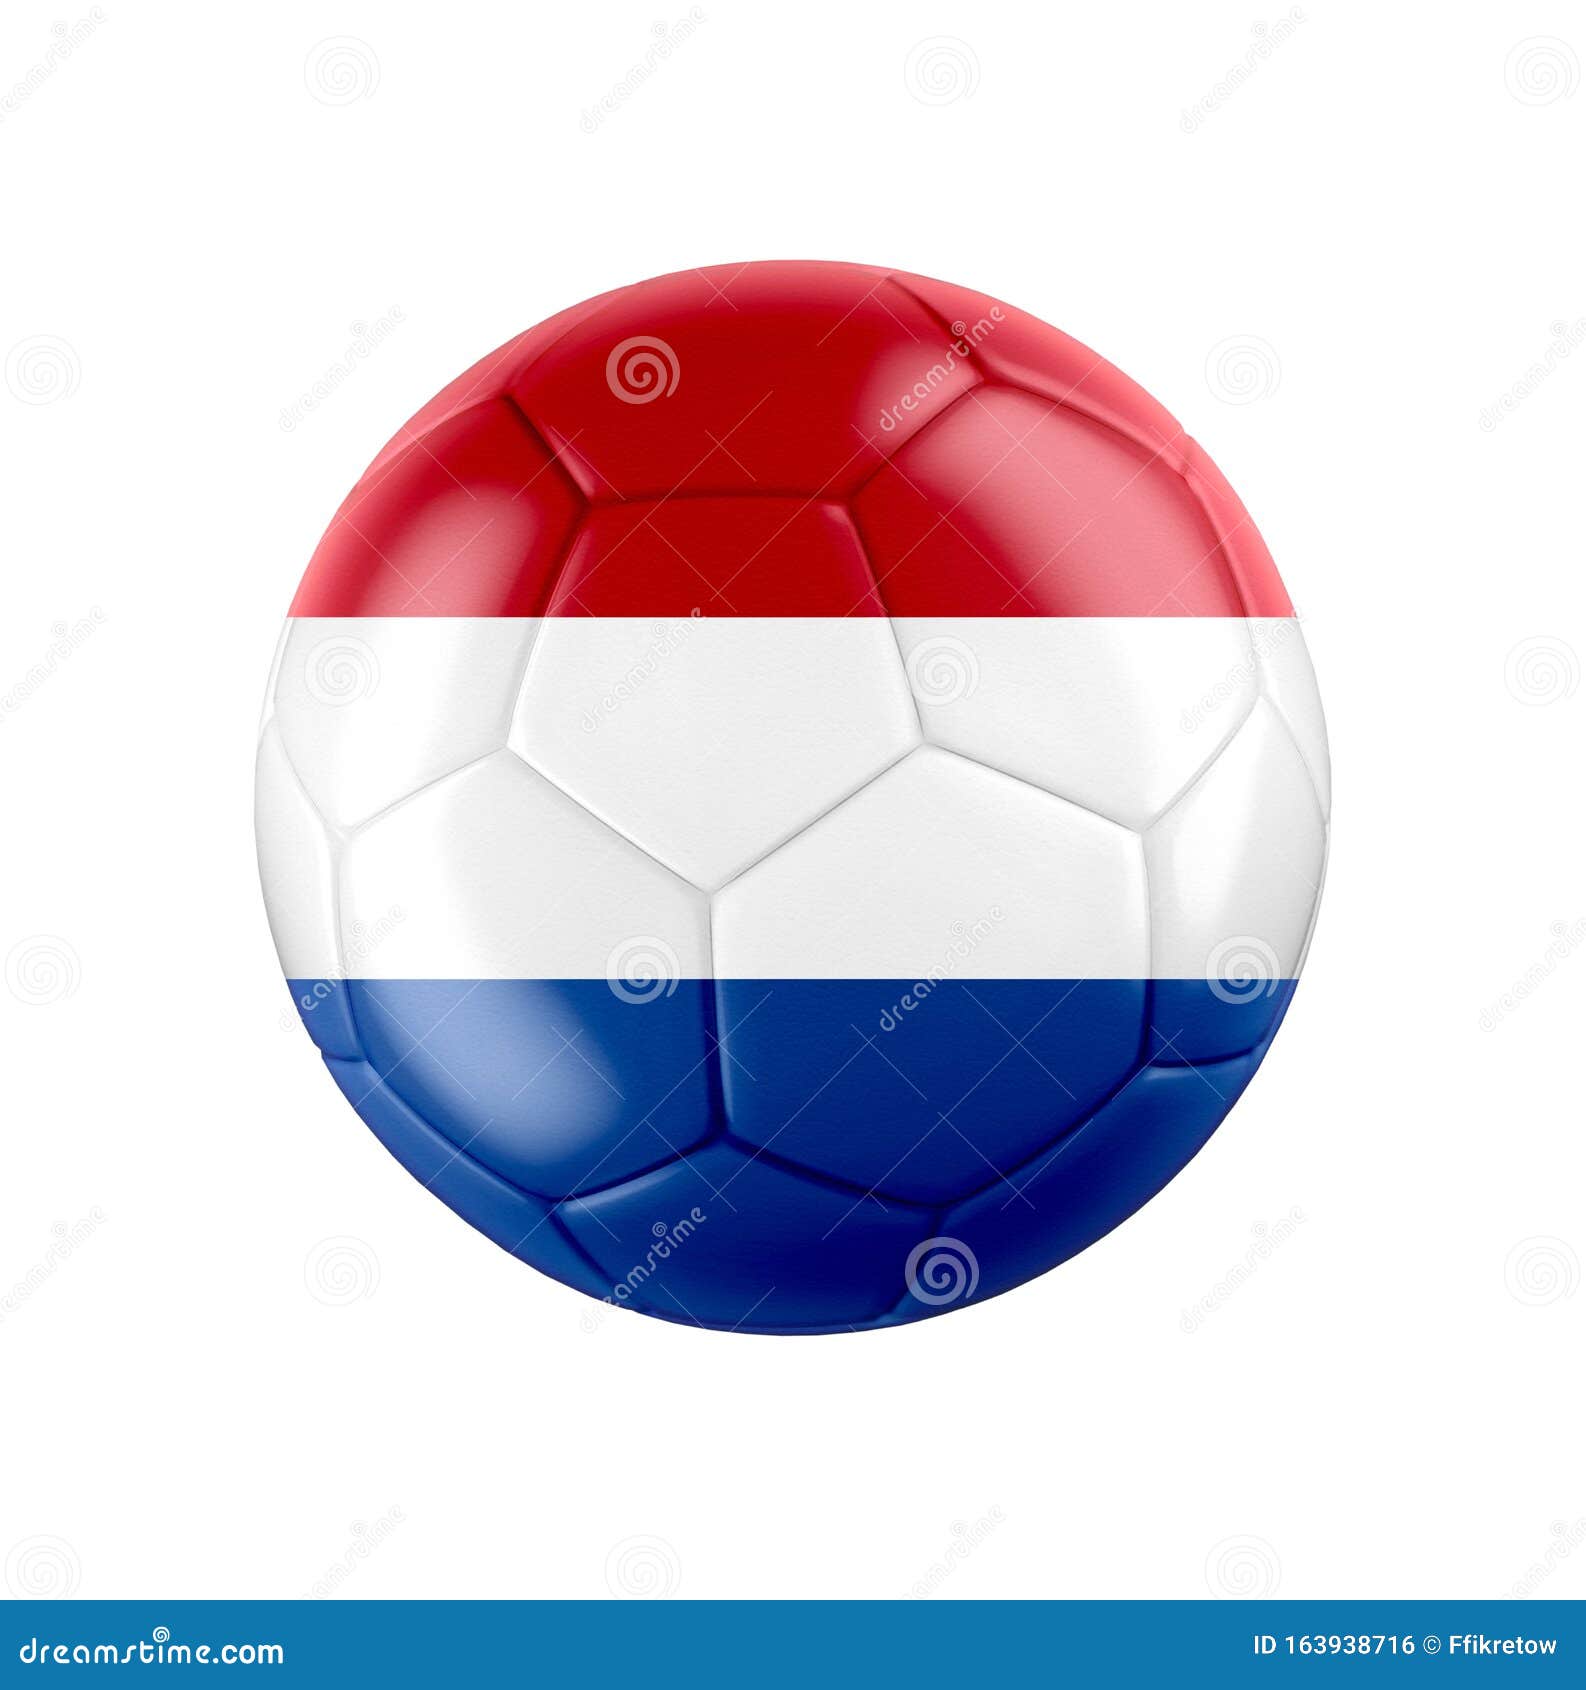 HOLLAND NETHERLAND FLAG Mini Boxing Gloves Ornament BRAND NEW World Cup Soccer 